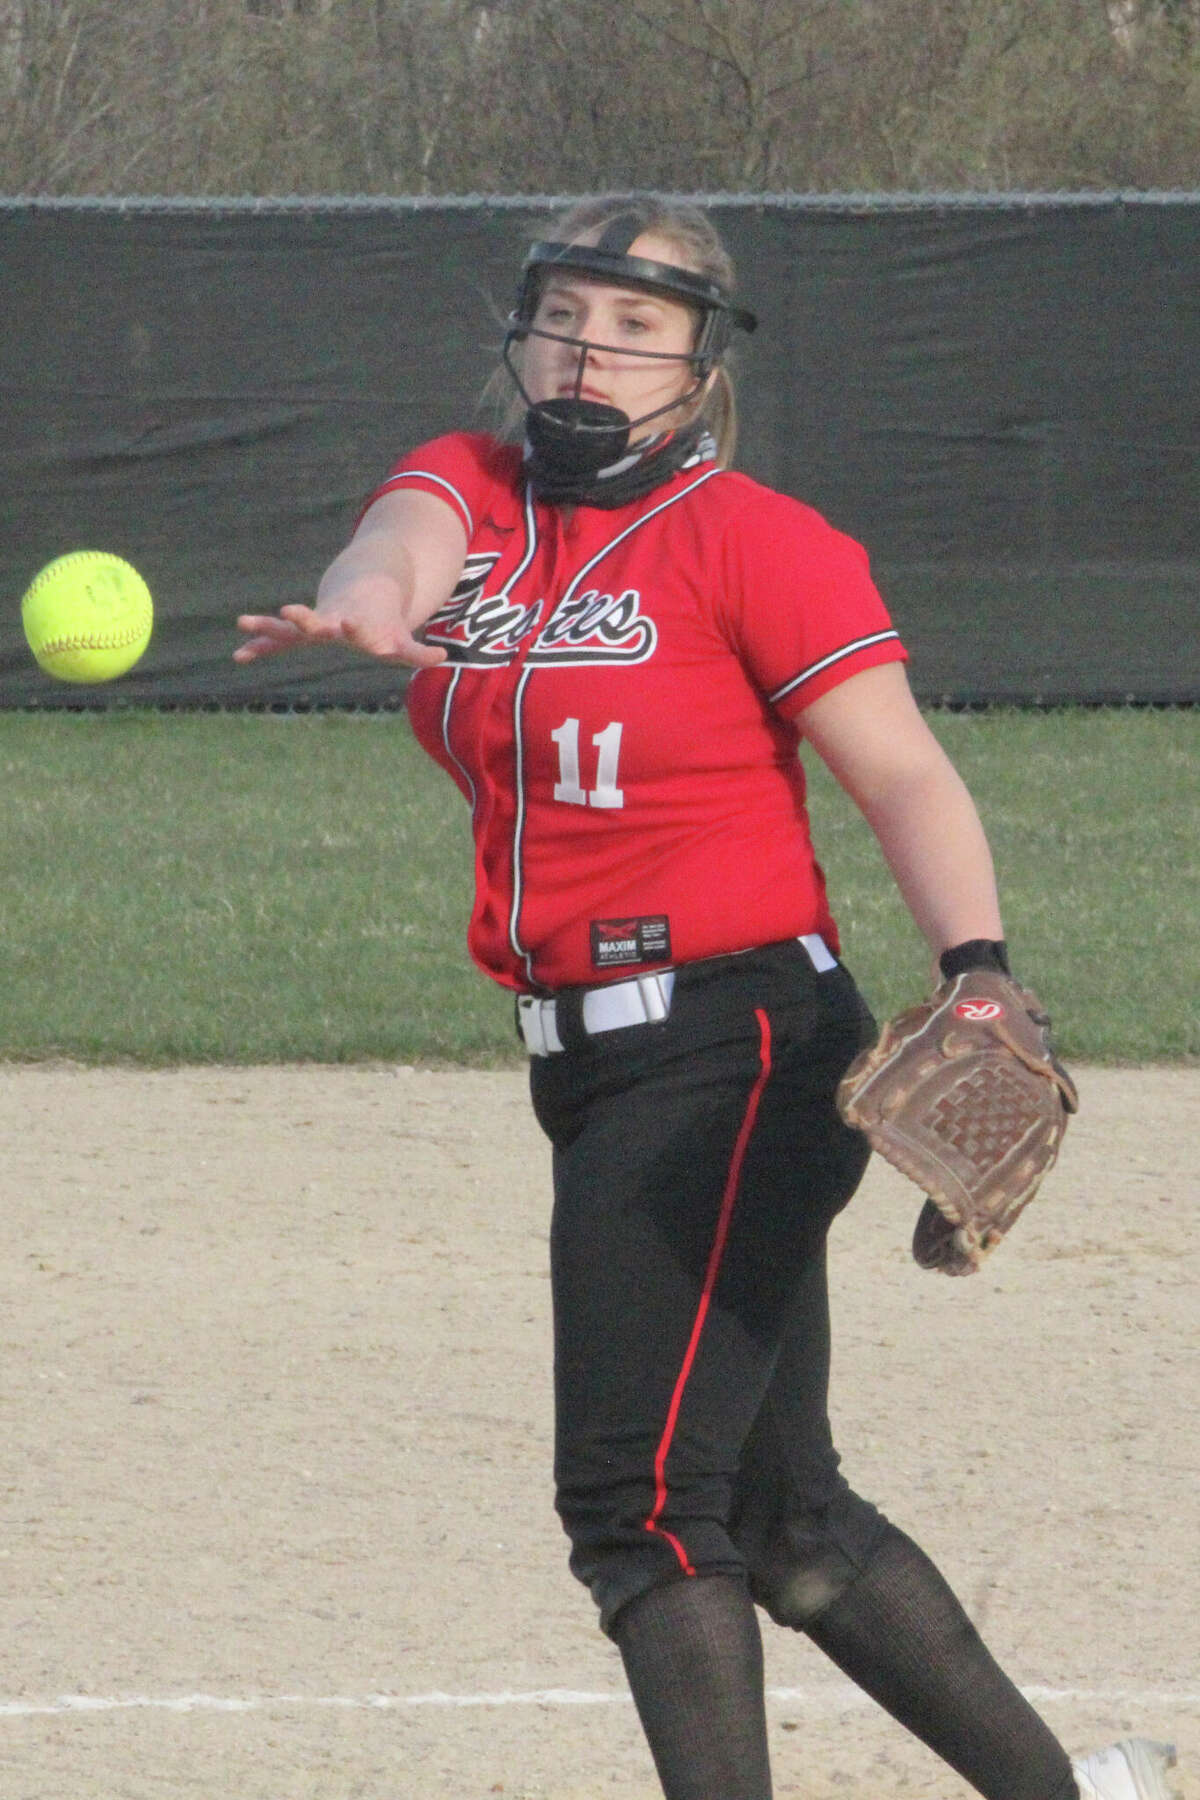 Rylie Shafer was a pitcher last year for Reed City but was focus on catcher and shortstop this year.